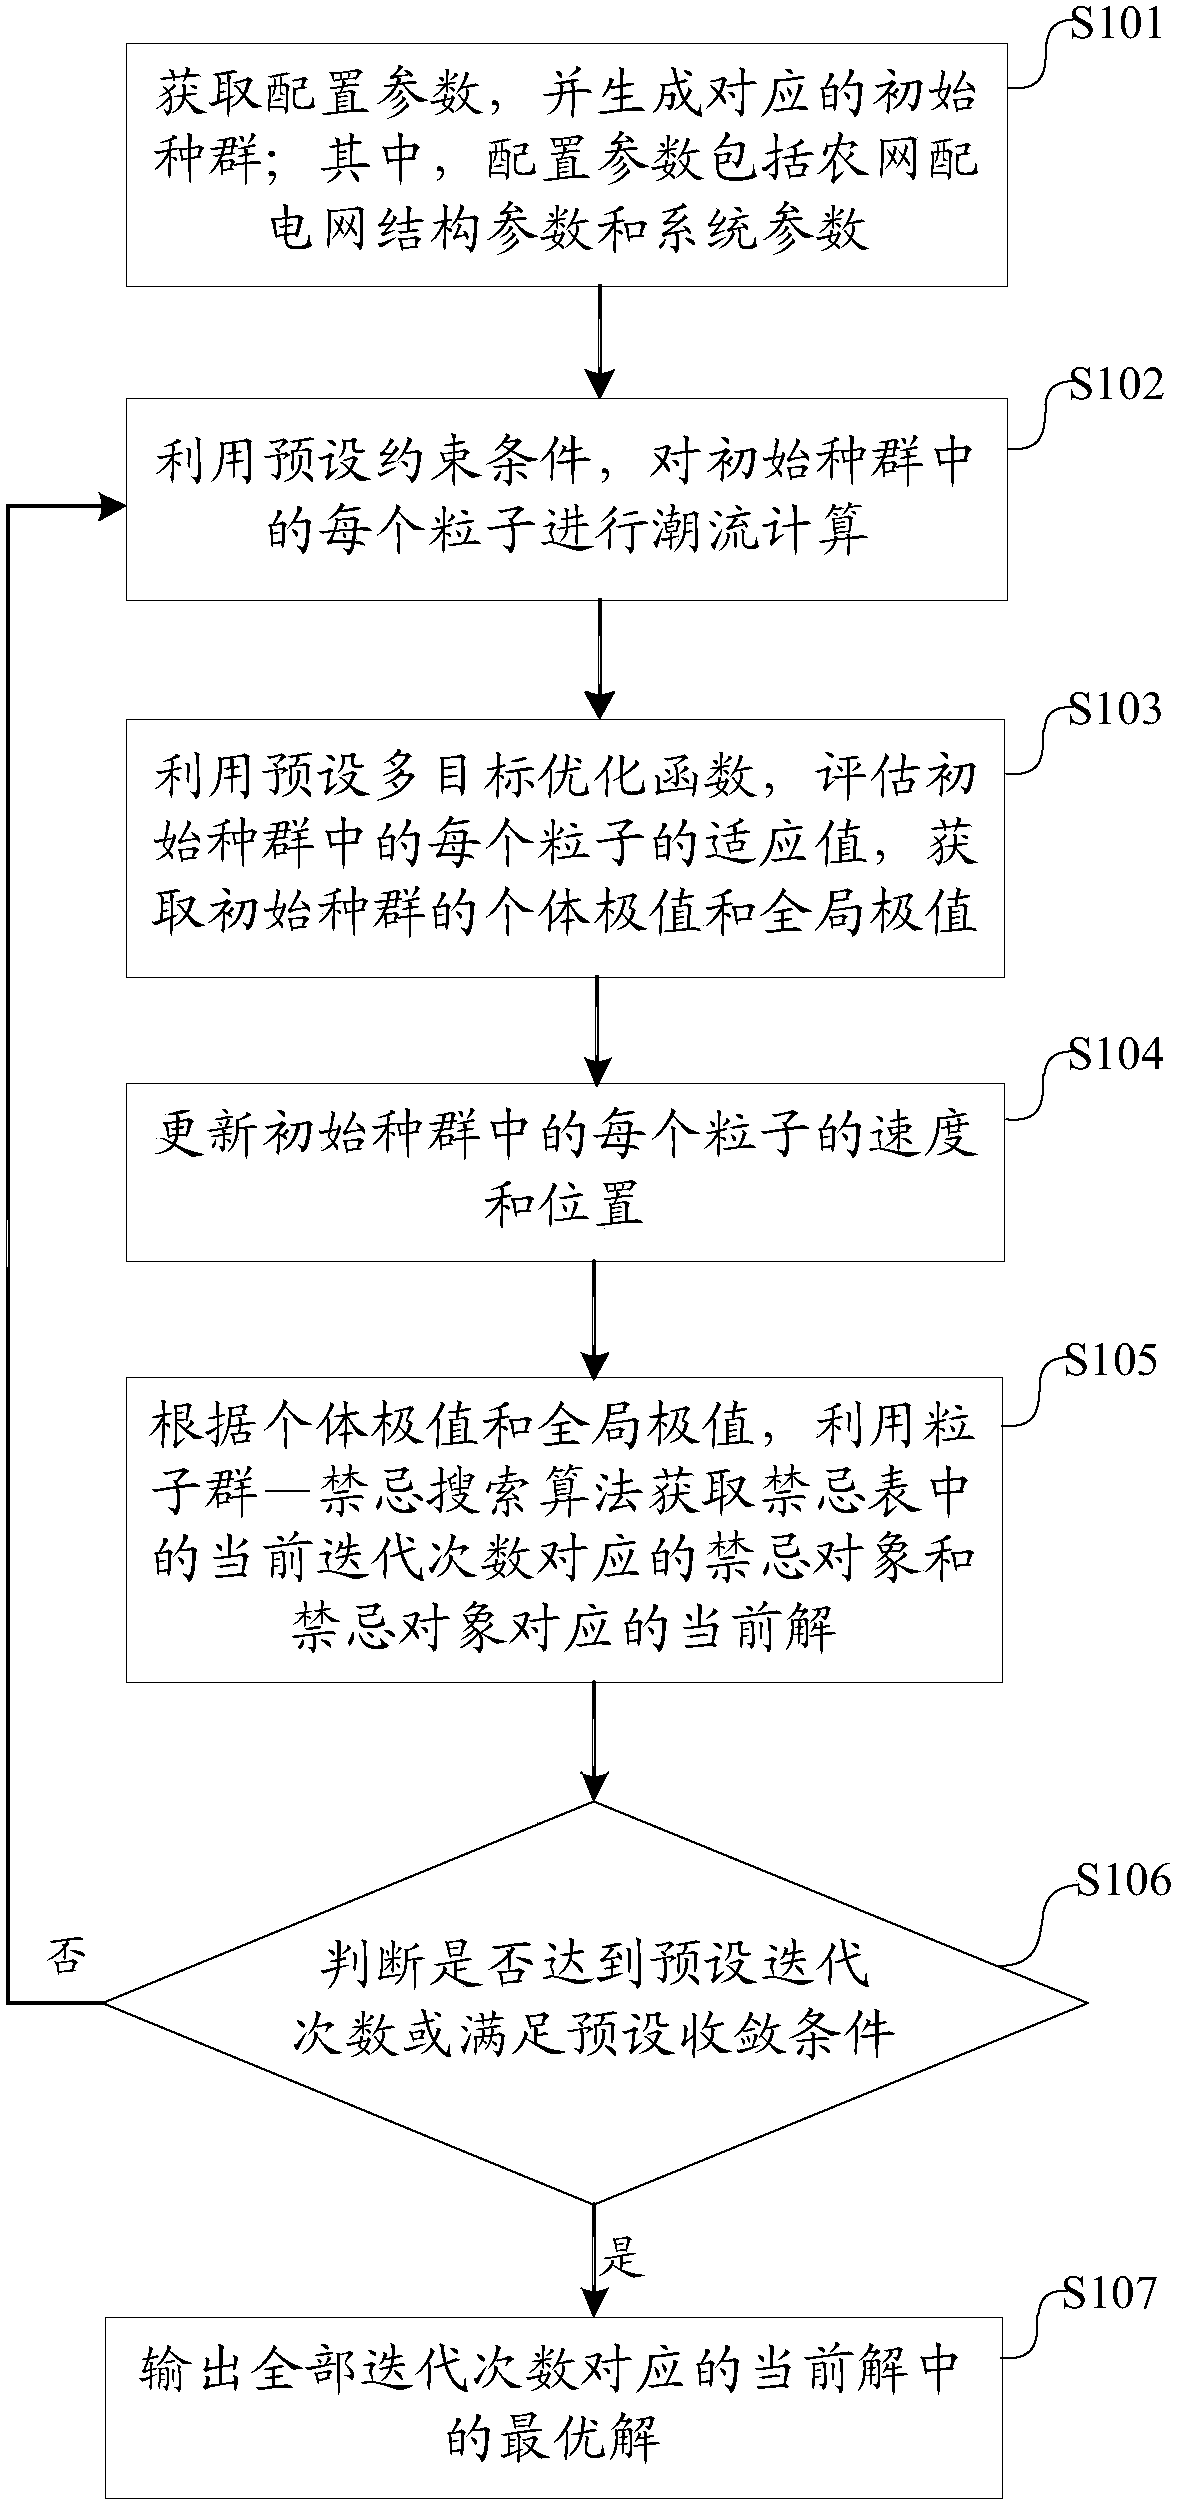 Low-voltage comprehensive treatment method and apparatus for rural power grid power distribution district